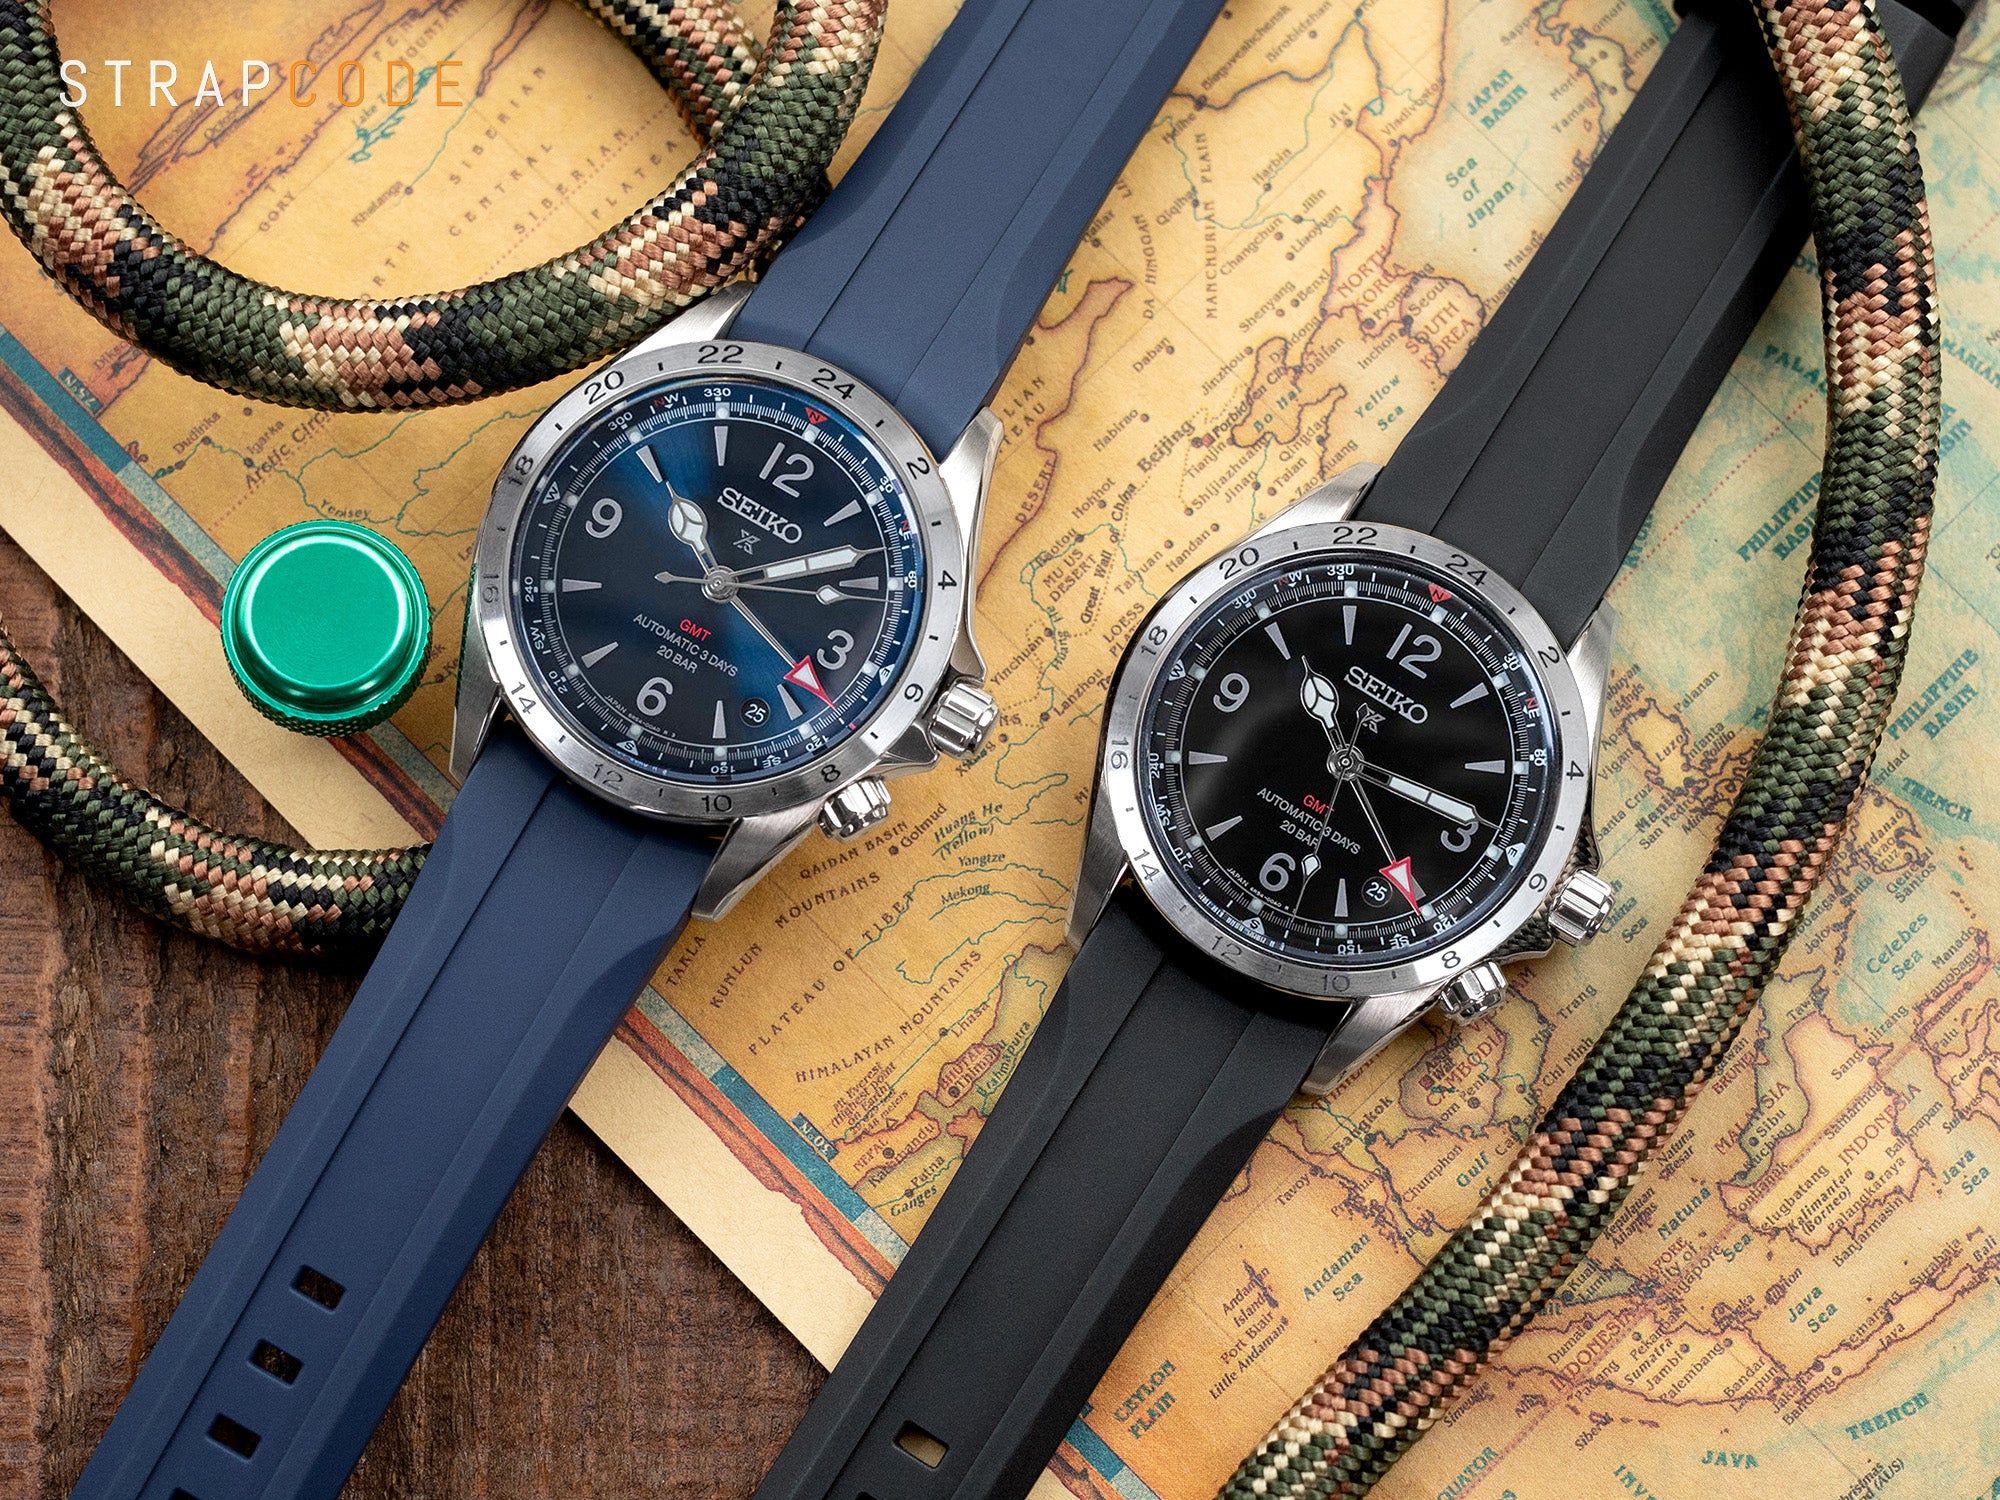 Seiko Alpinist GMT SPB379 and SPB377 with Strapcode fitted endlink watch bands